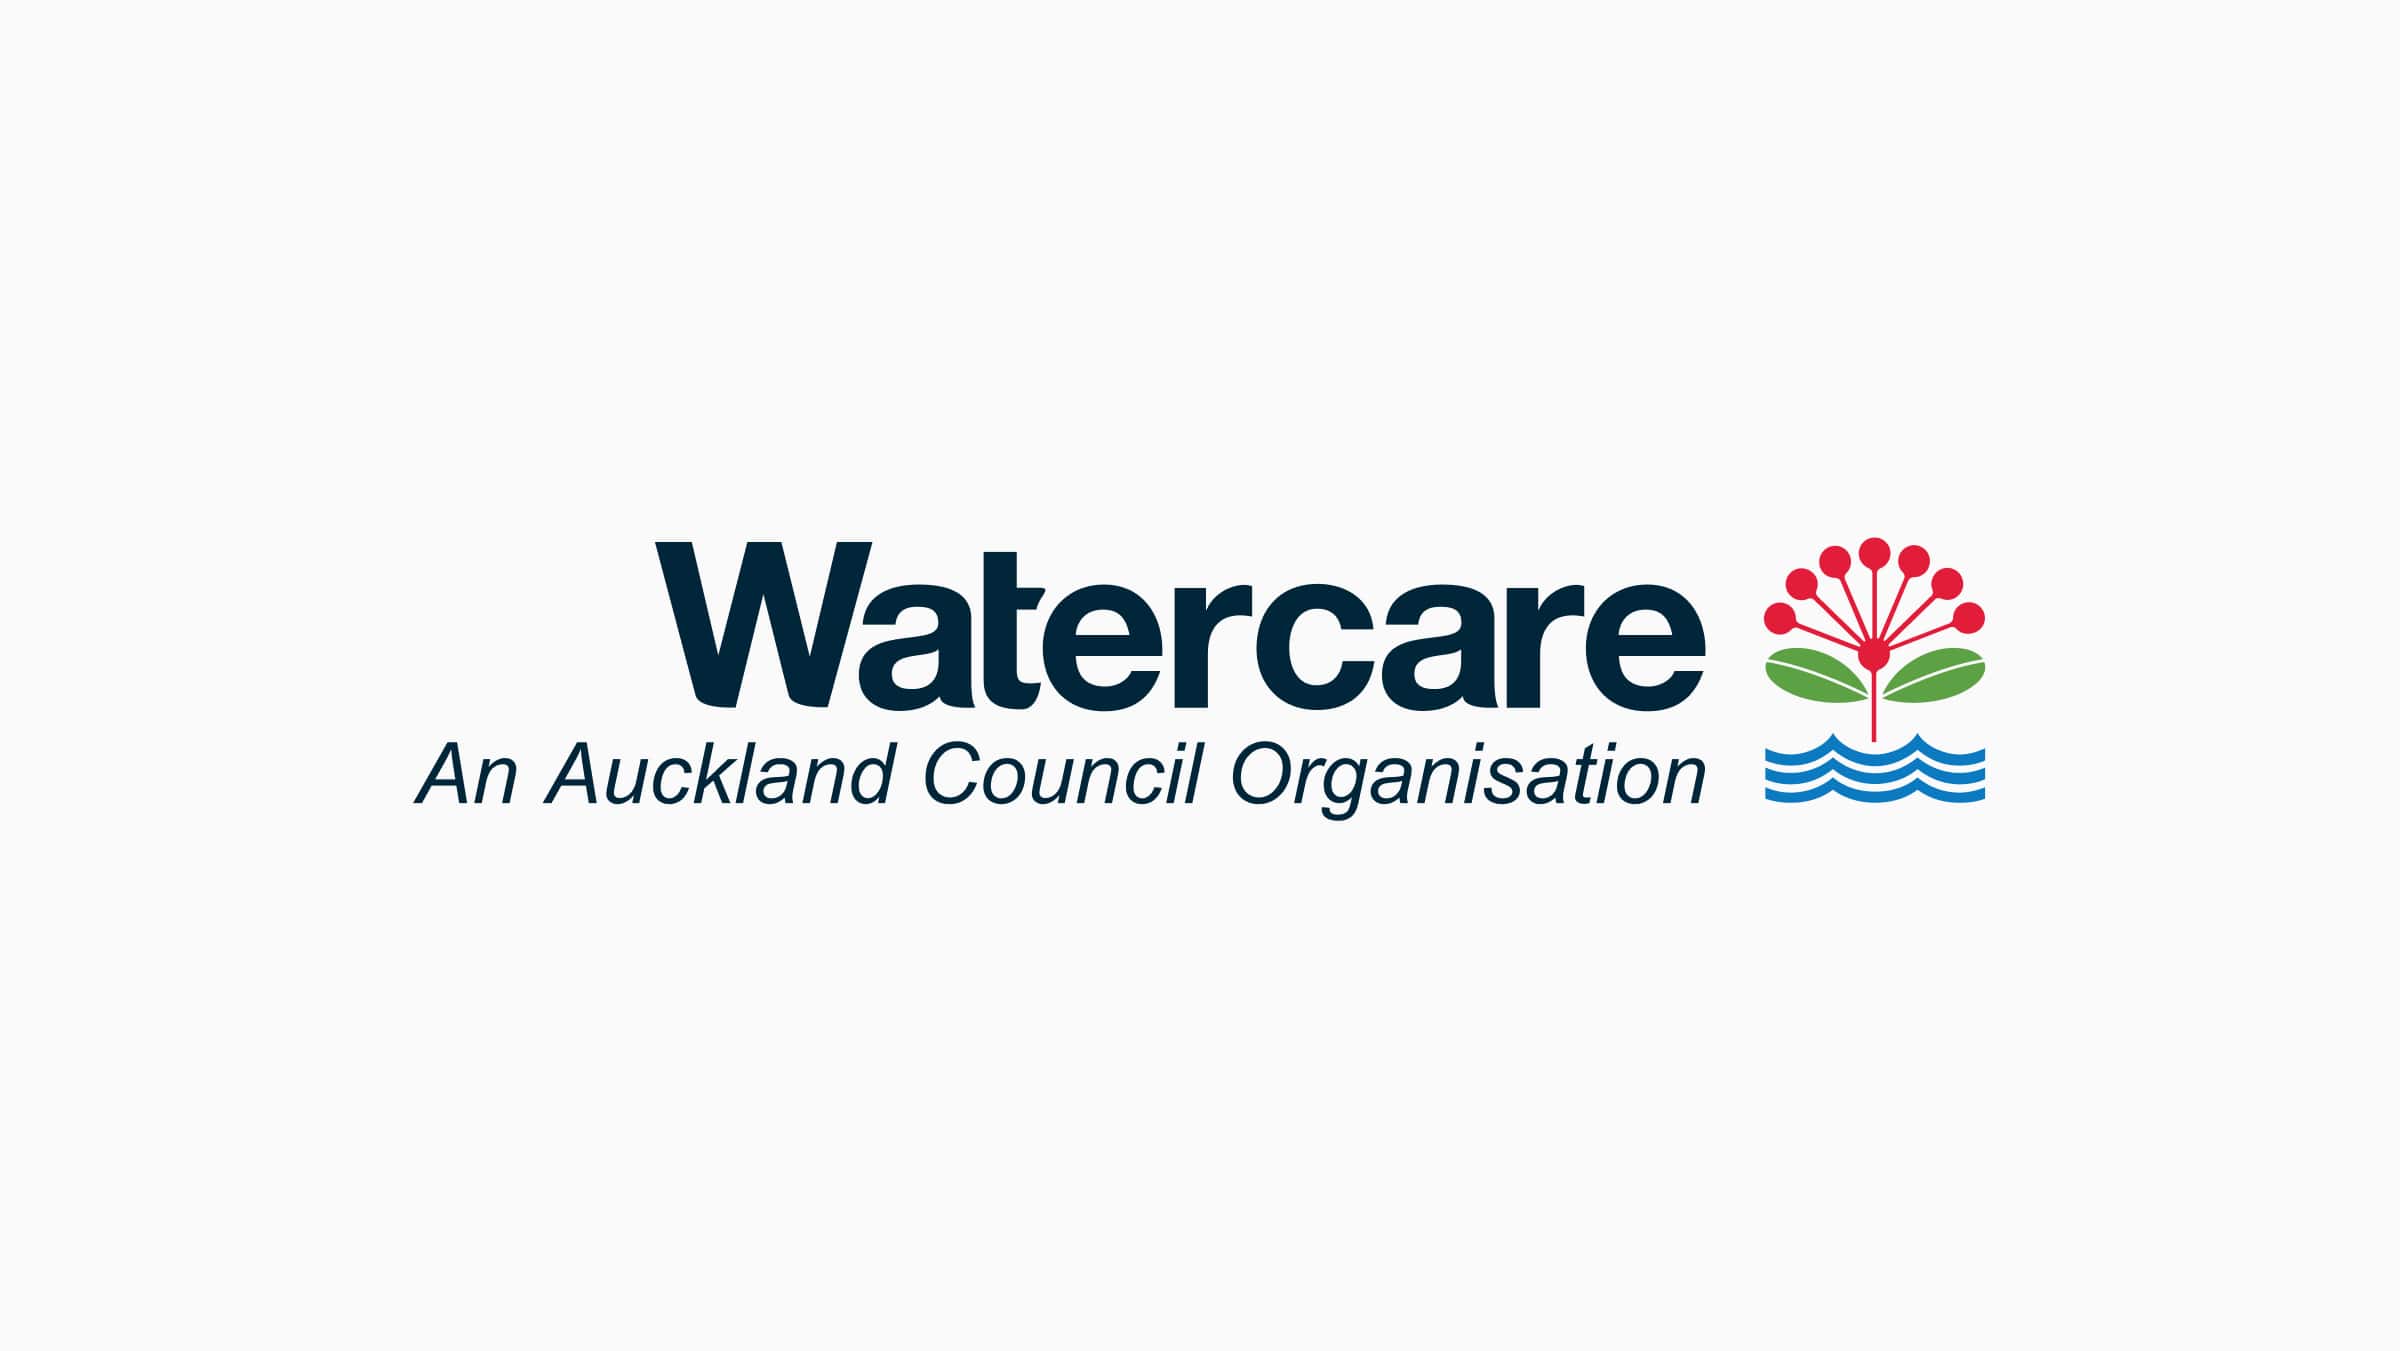 The Watercare logo